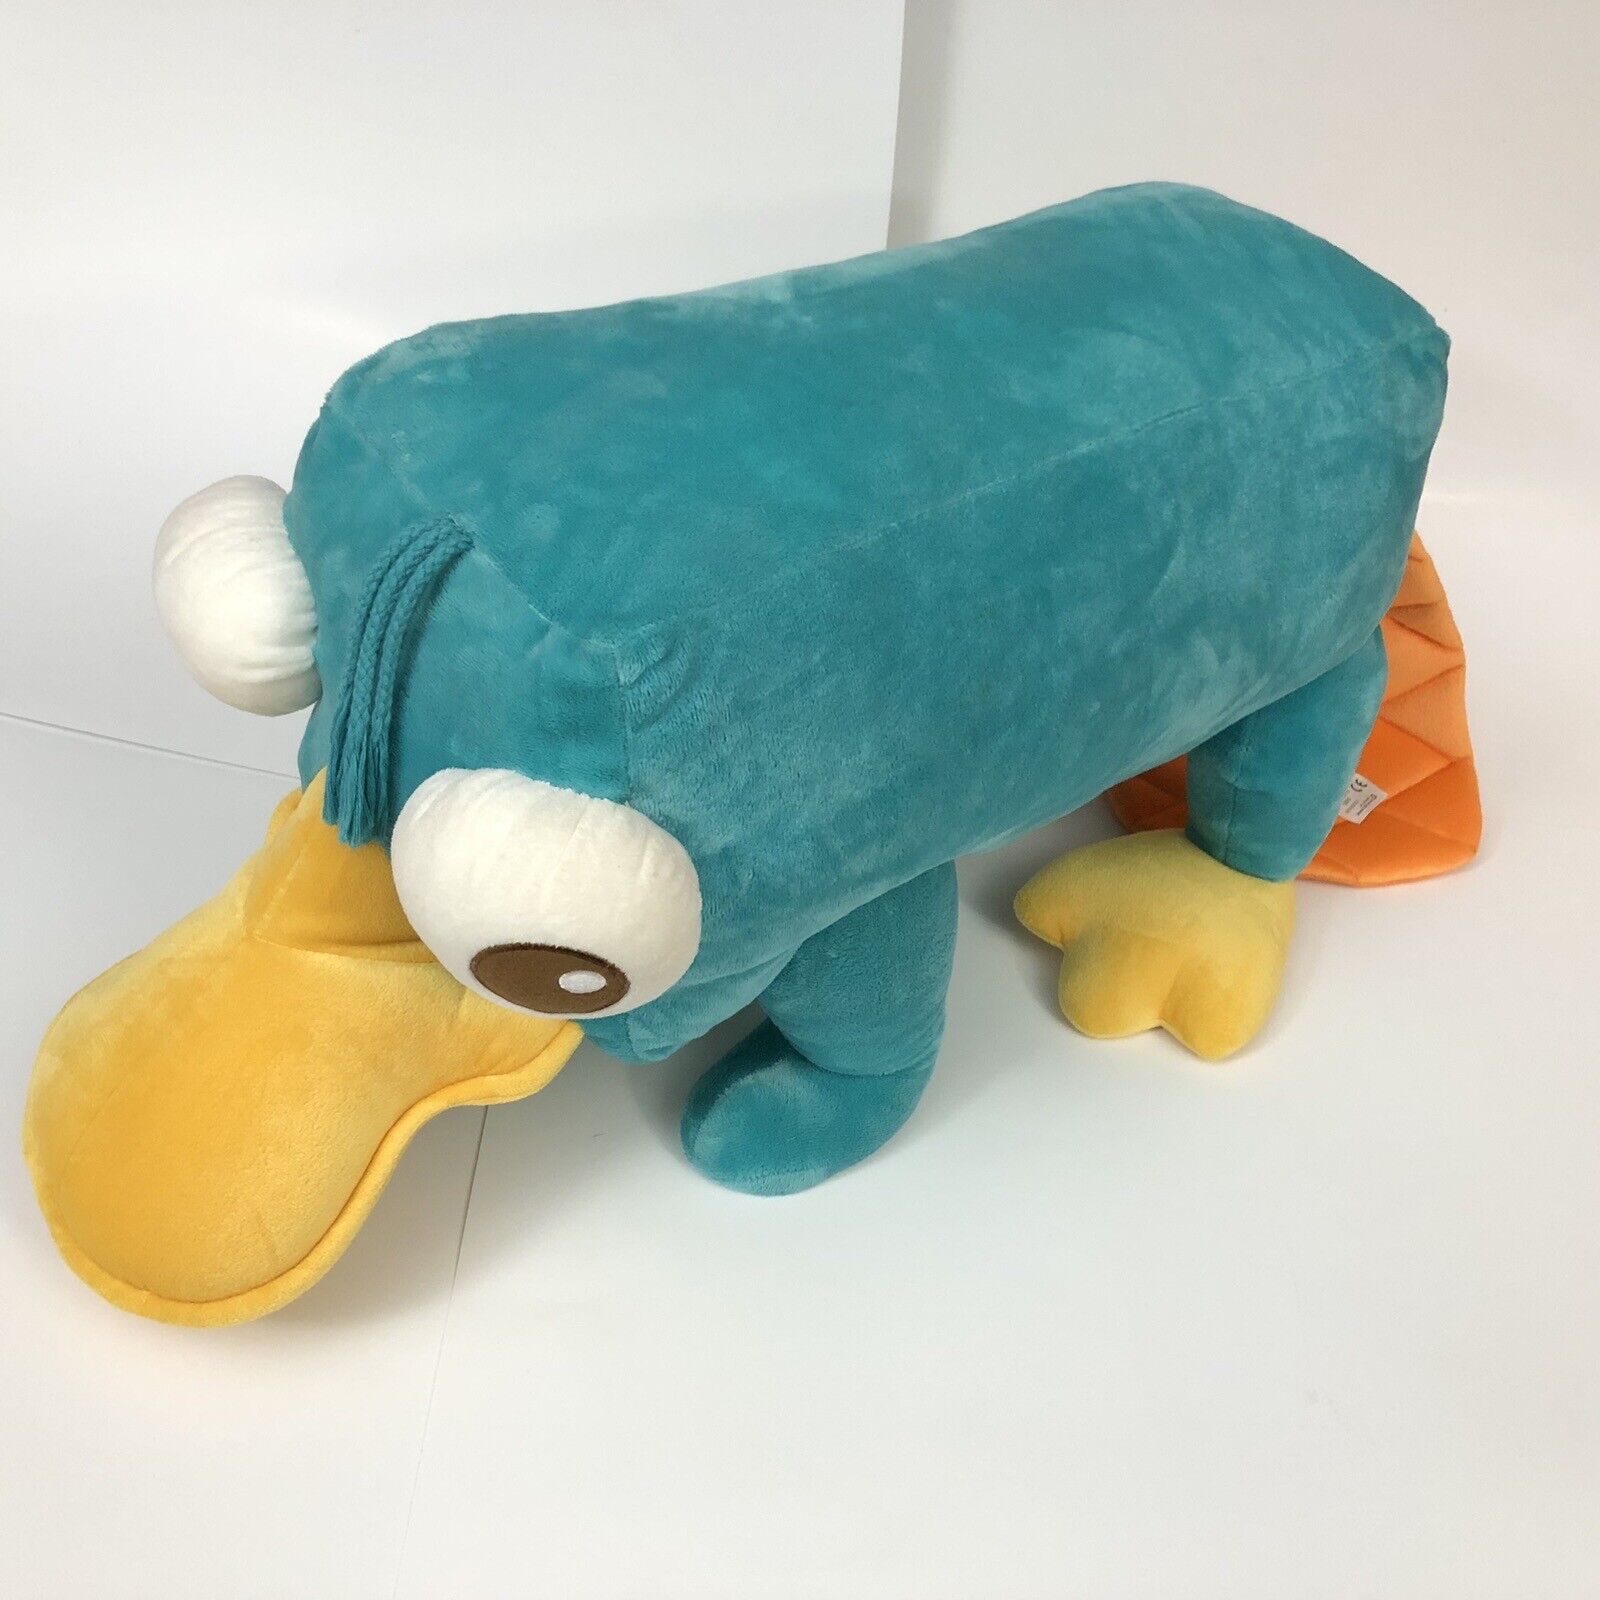 HUGE (36)25” Disney Store PERRY the Platypus Plush Phineas Ferb Stuffed TOY Rare